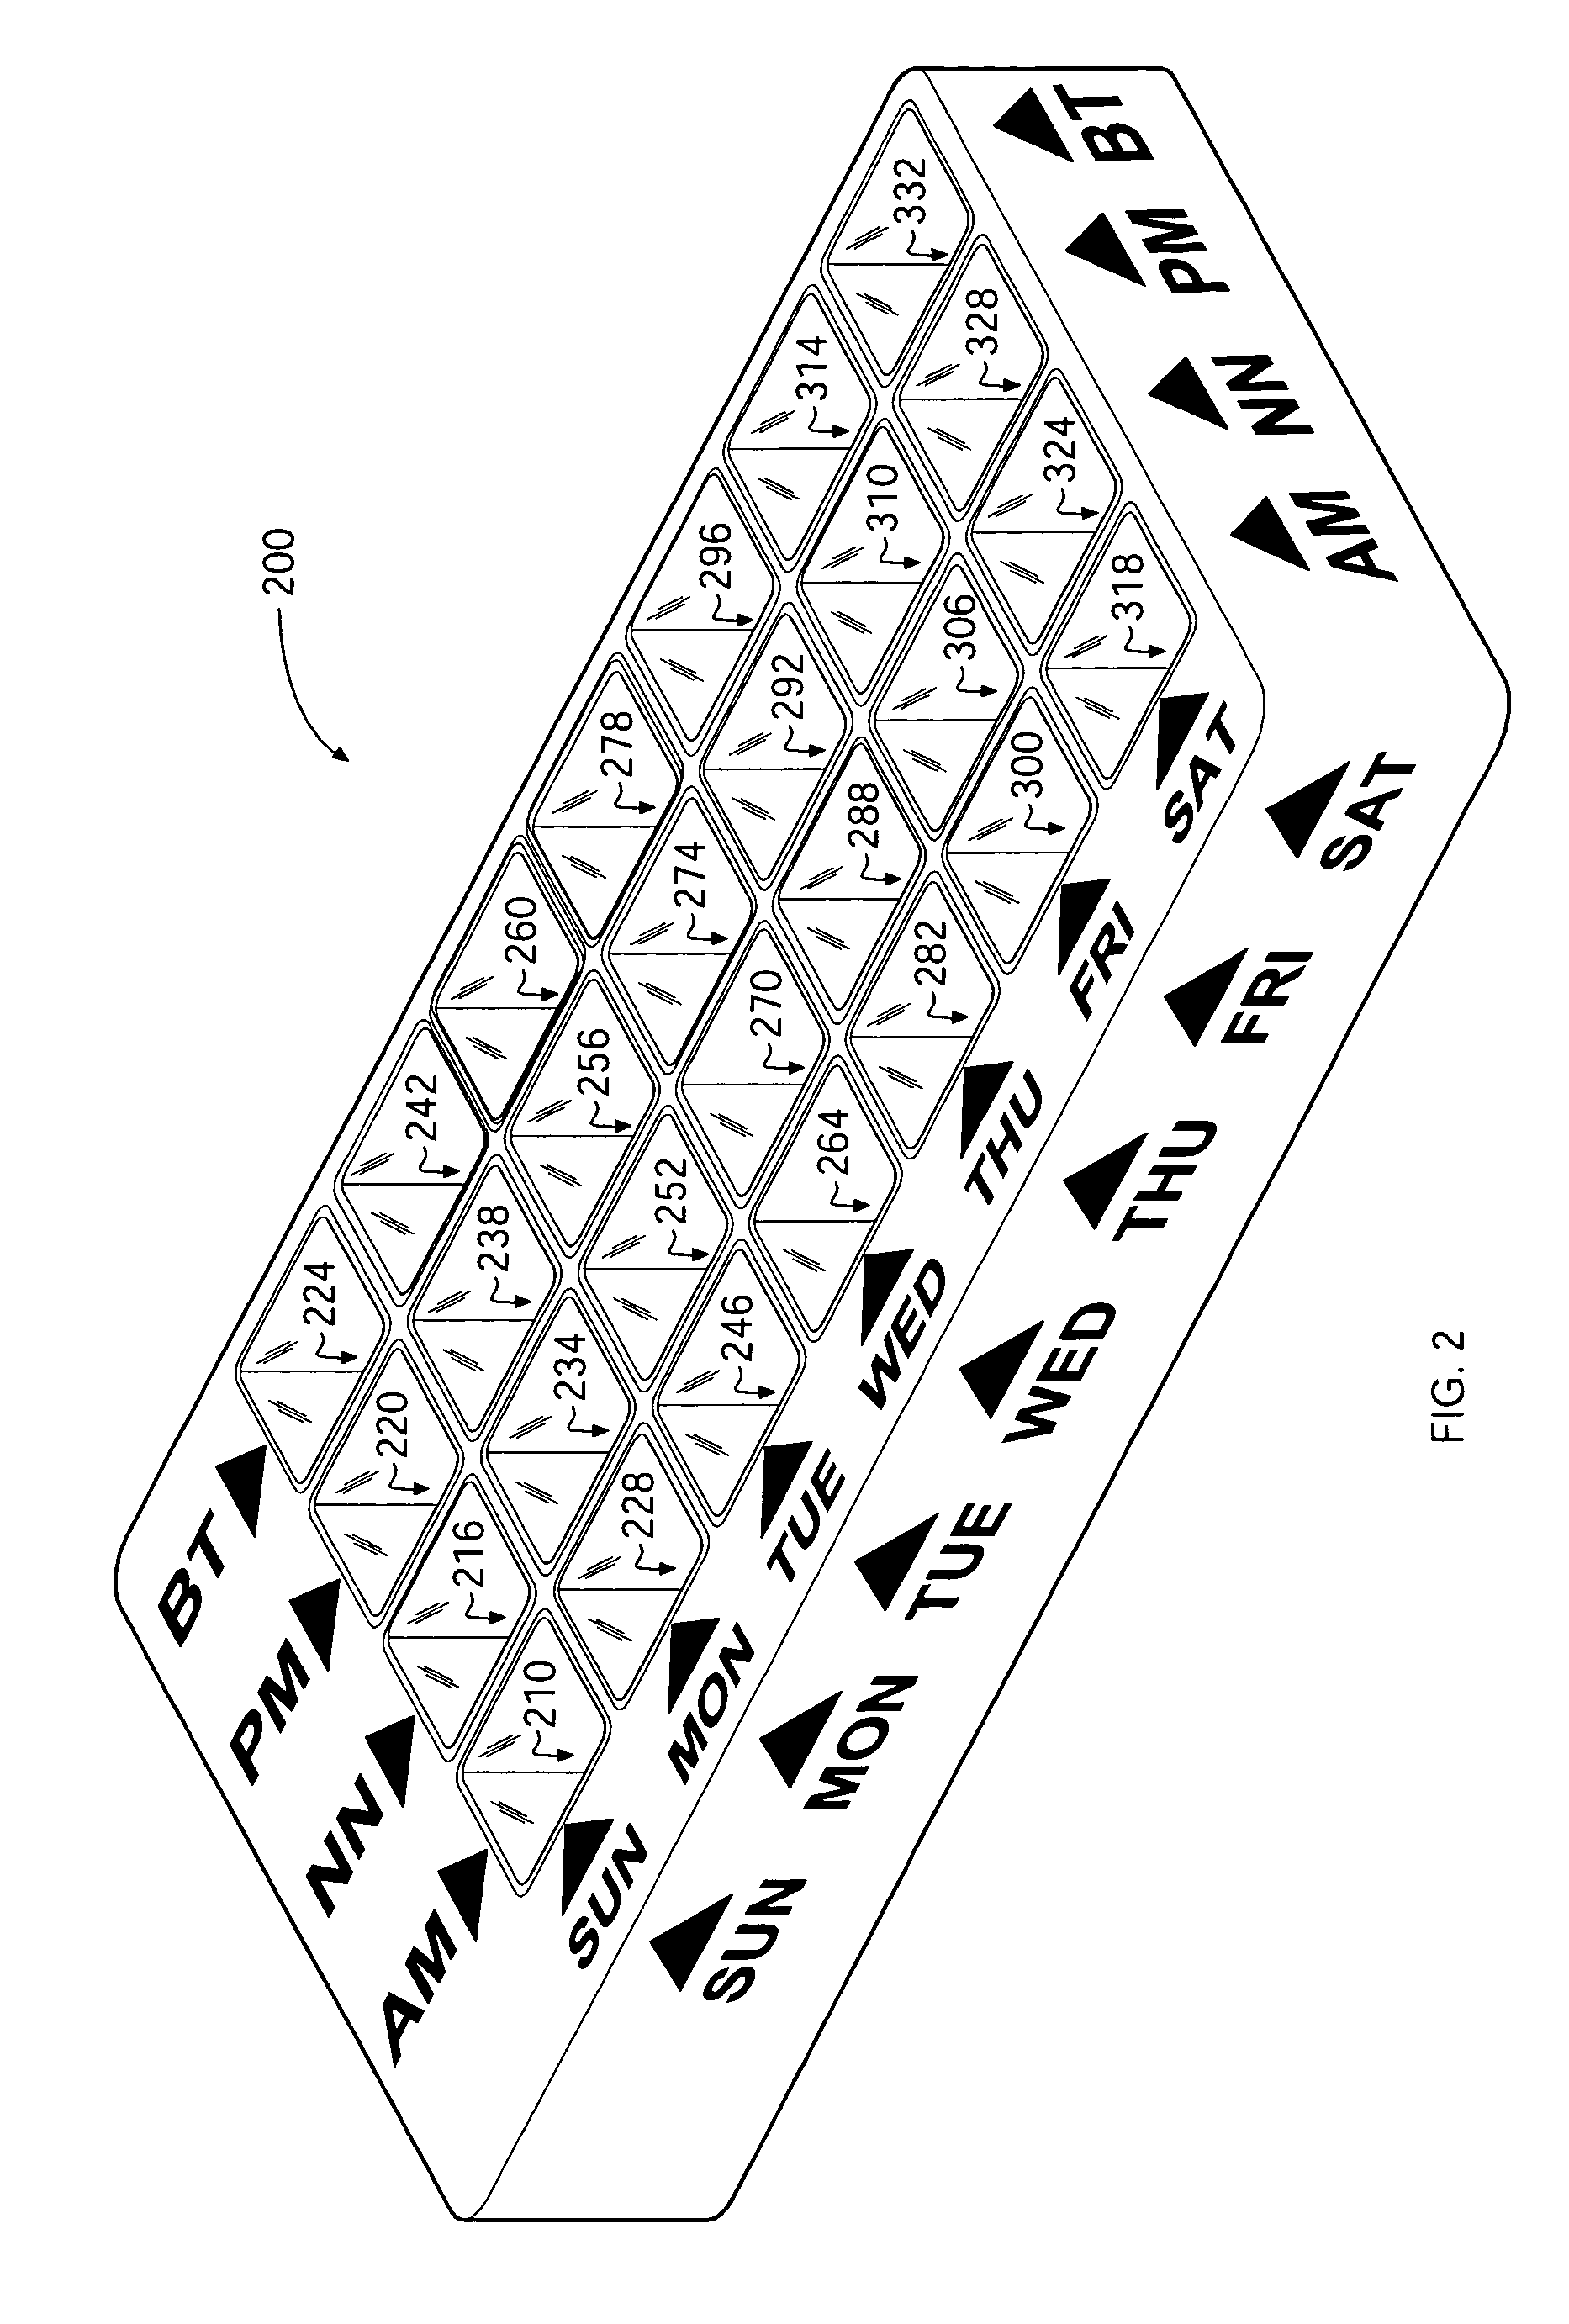 Method and system for storing and dispensing regime of therapeutic dosages